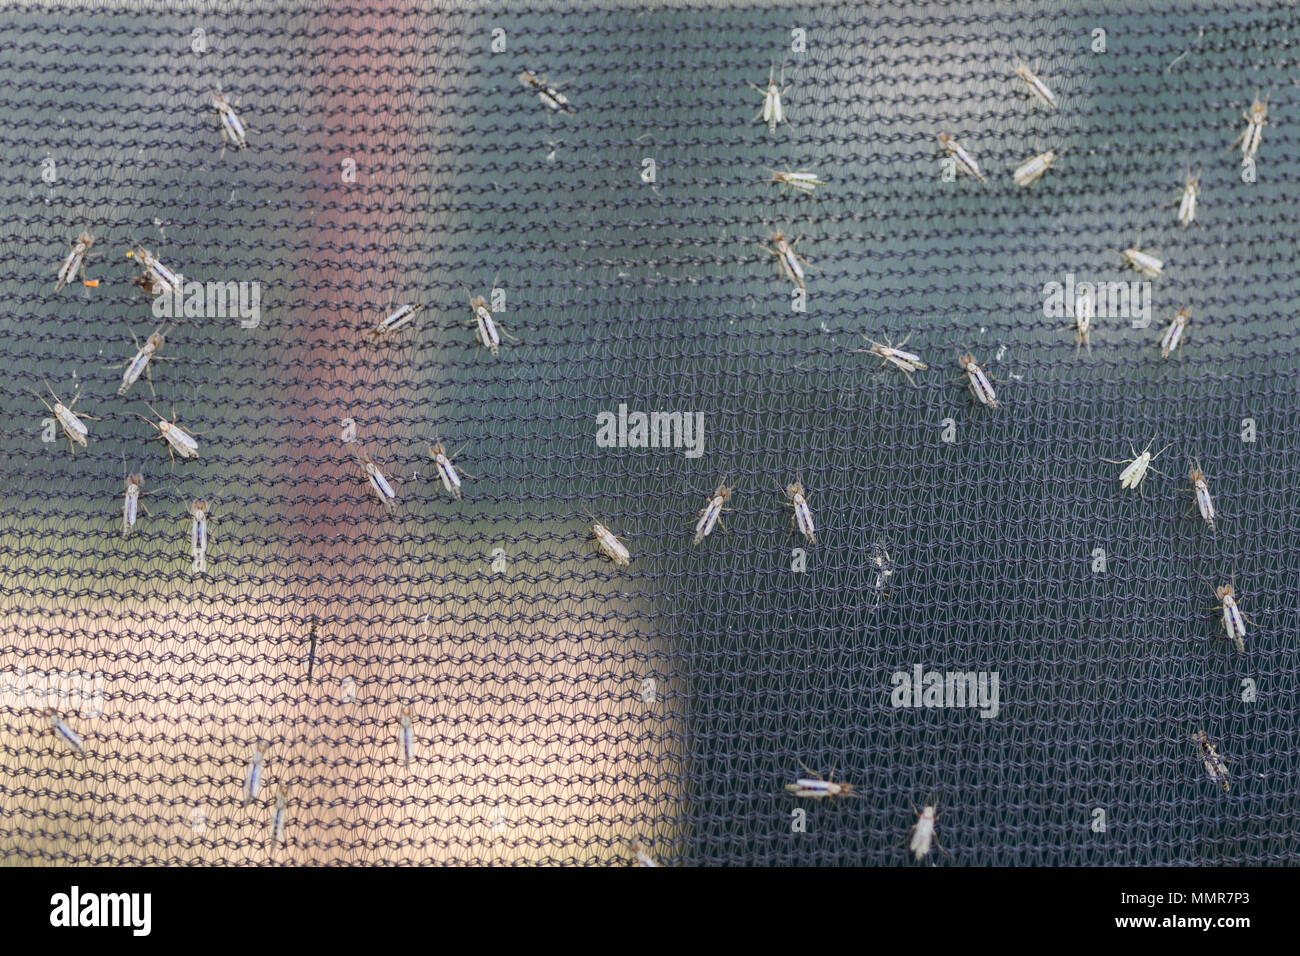 Lot of midges or mosquiotos sitting on balck protective insect screen. Chironomus plumosus Stock Photo